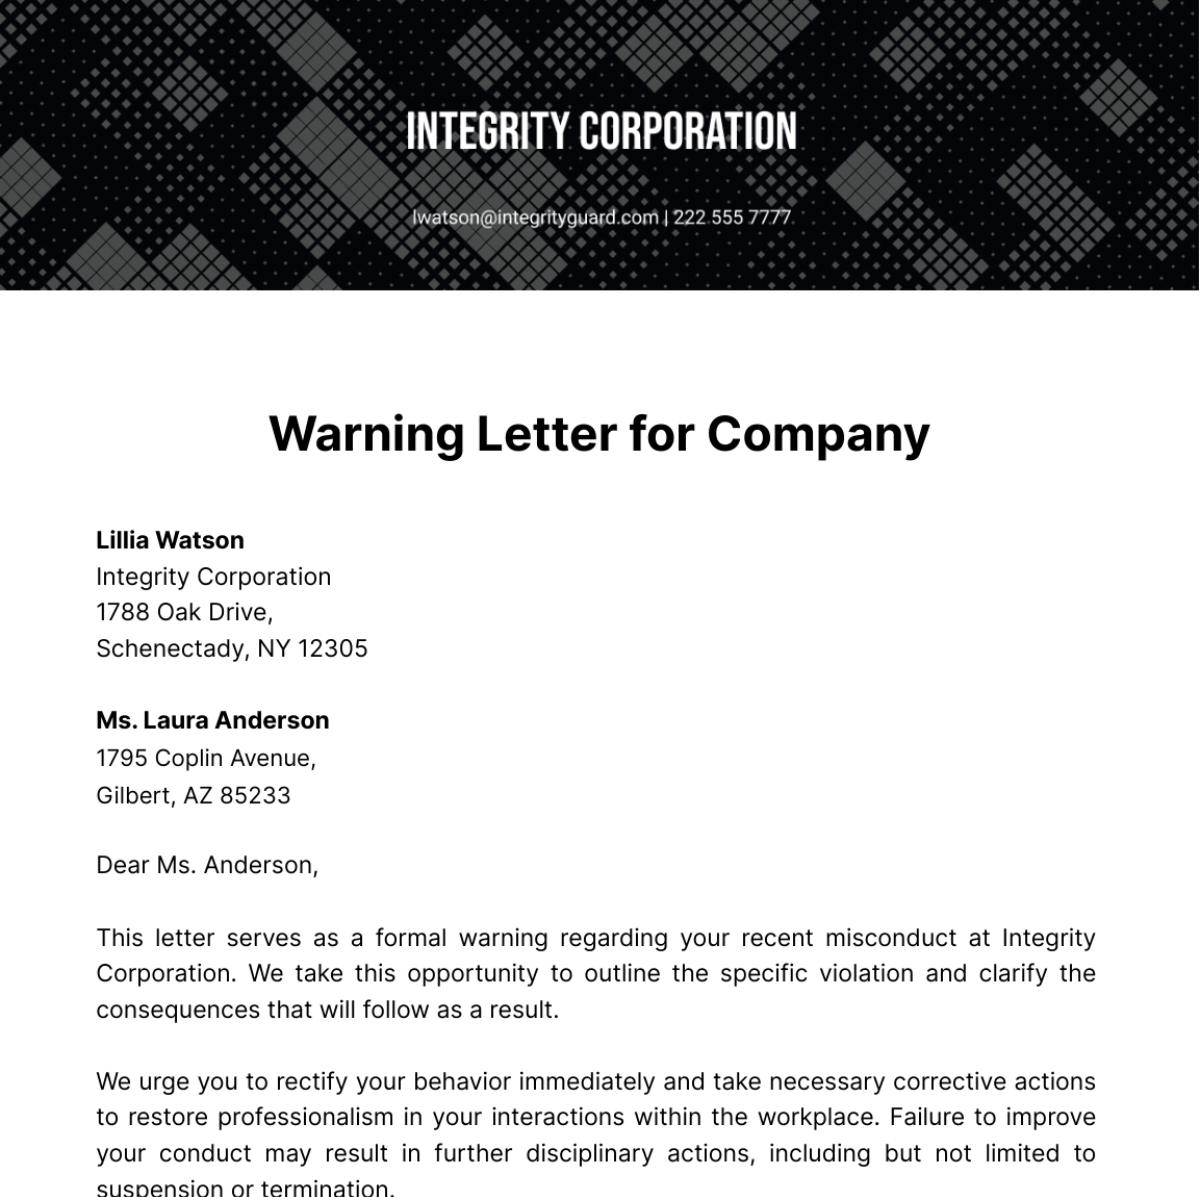 Warning Letter for Company Template